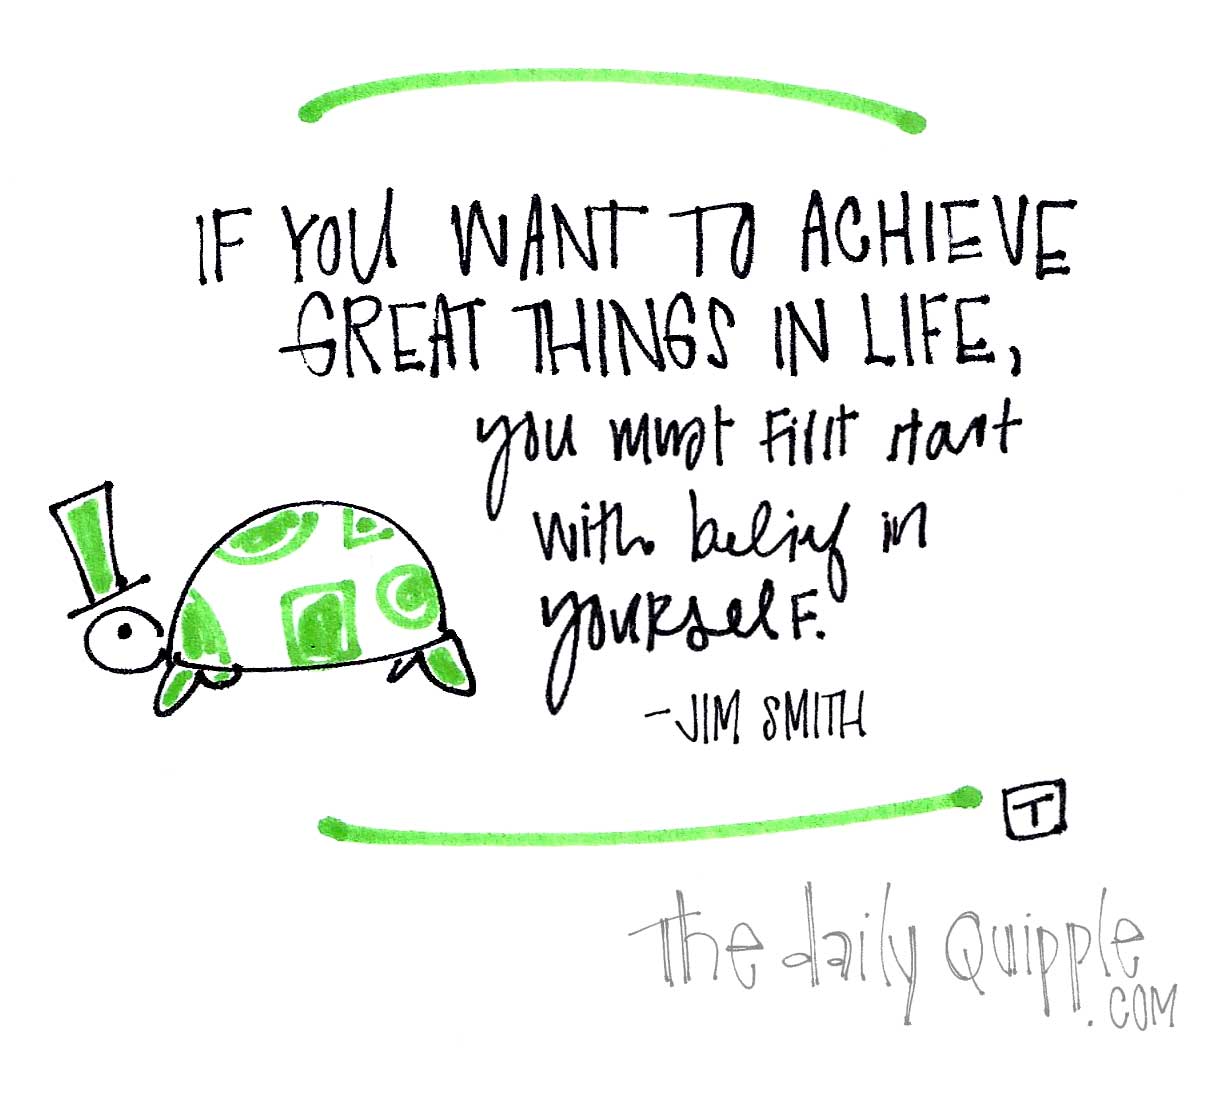 If You Want To Achieve Great Things In Life, You Must First Start With Belief In Yourself. – Jim Smith